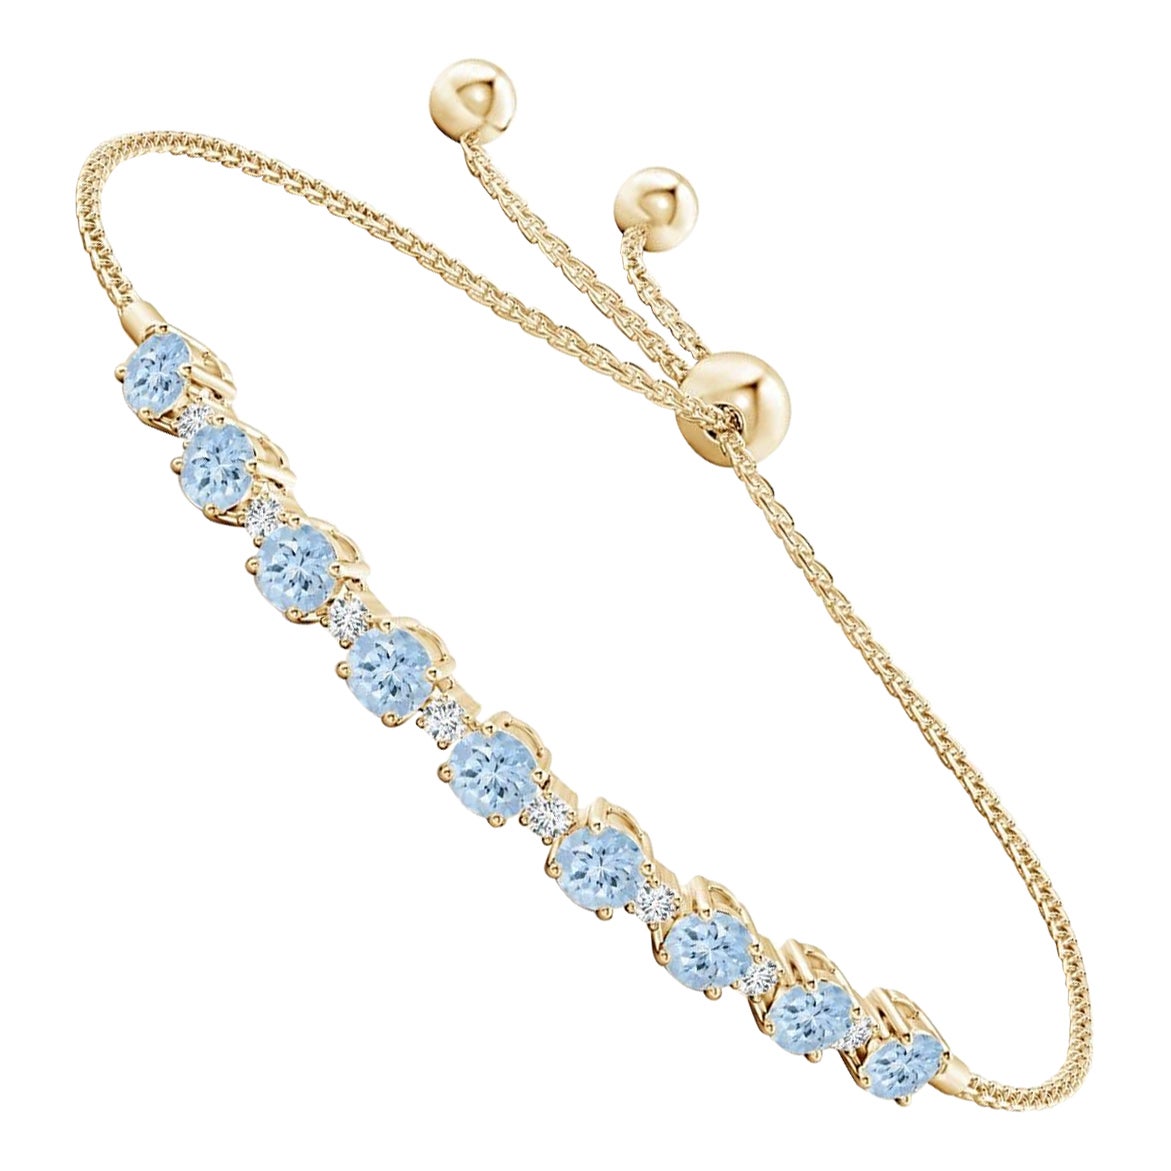 Natural 1.8ct Aquamarine and Diamond Tennis Bracelet in 14K Yellow Gold For Sale